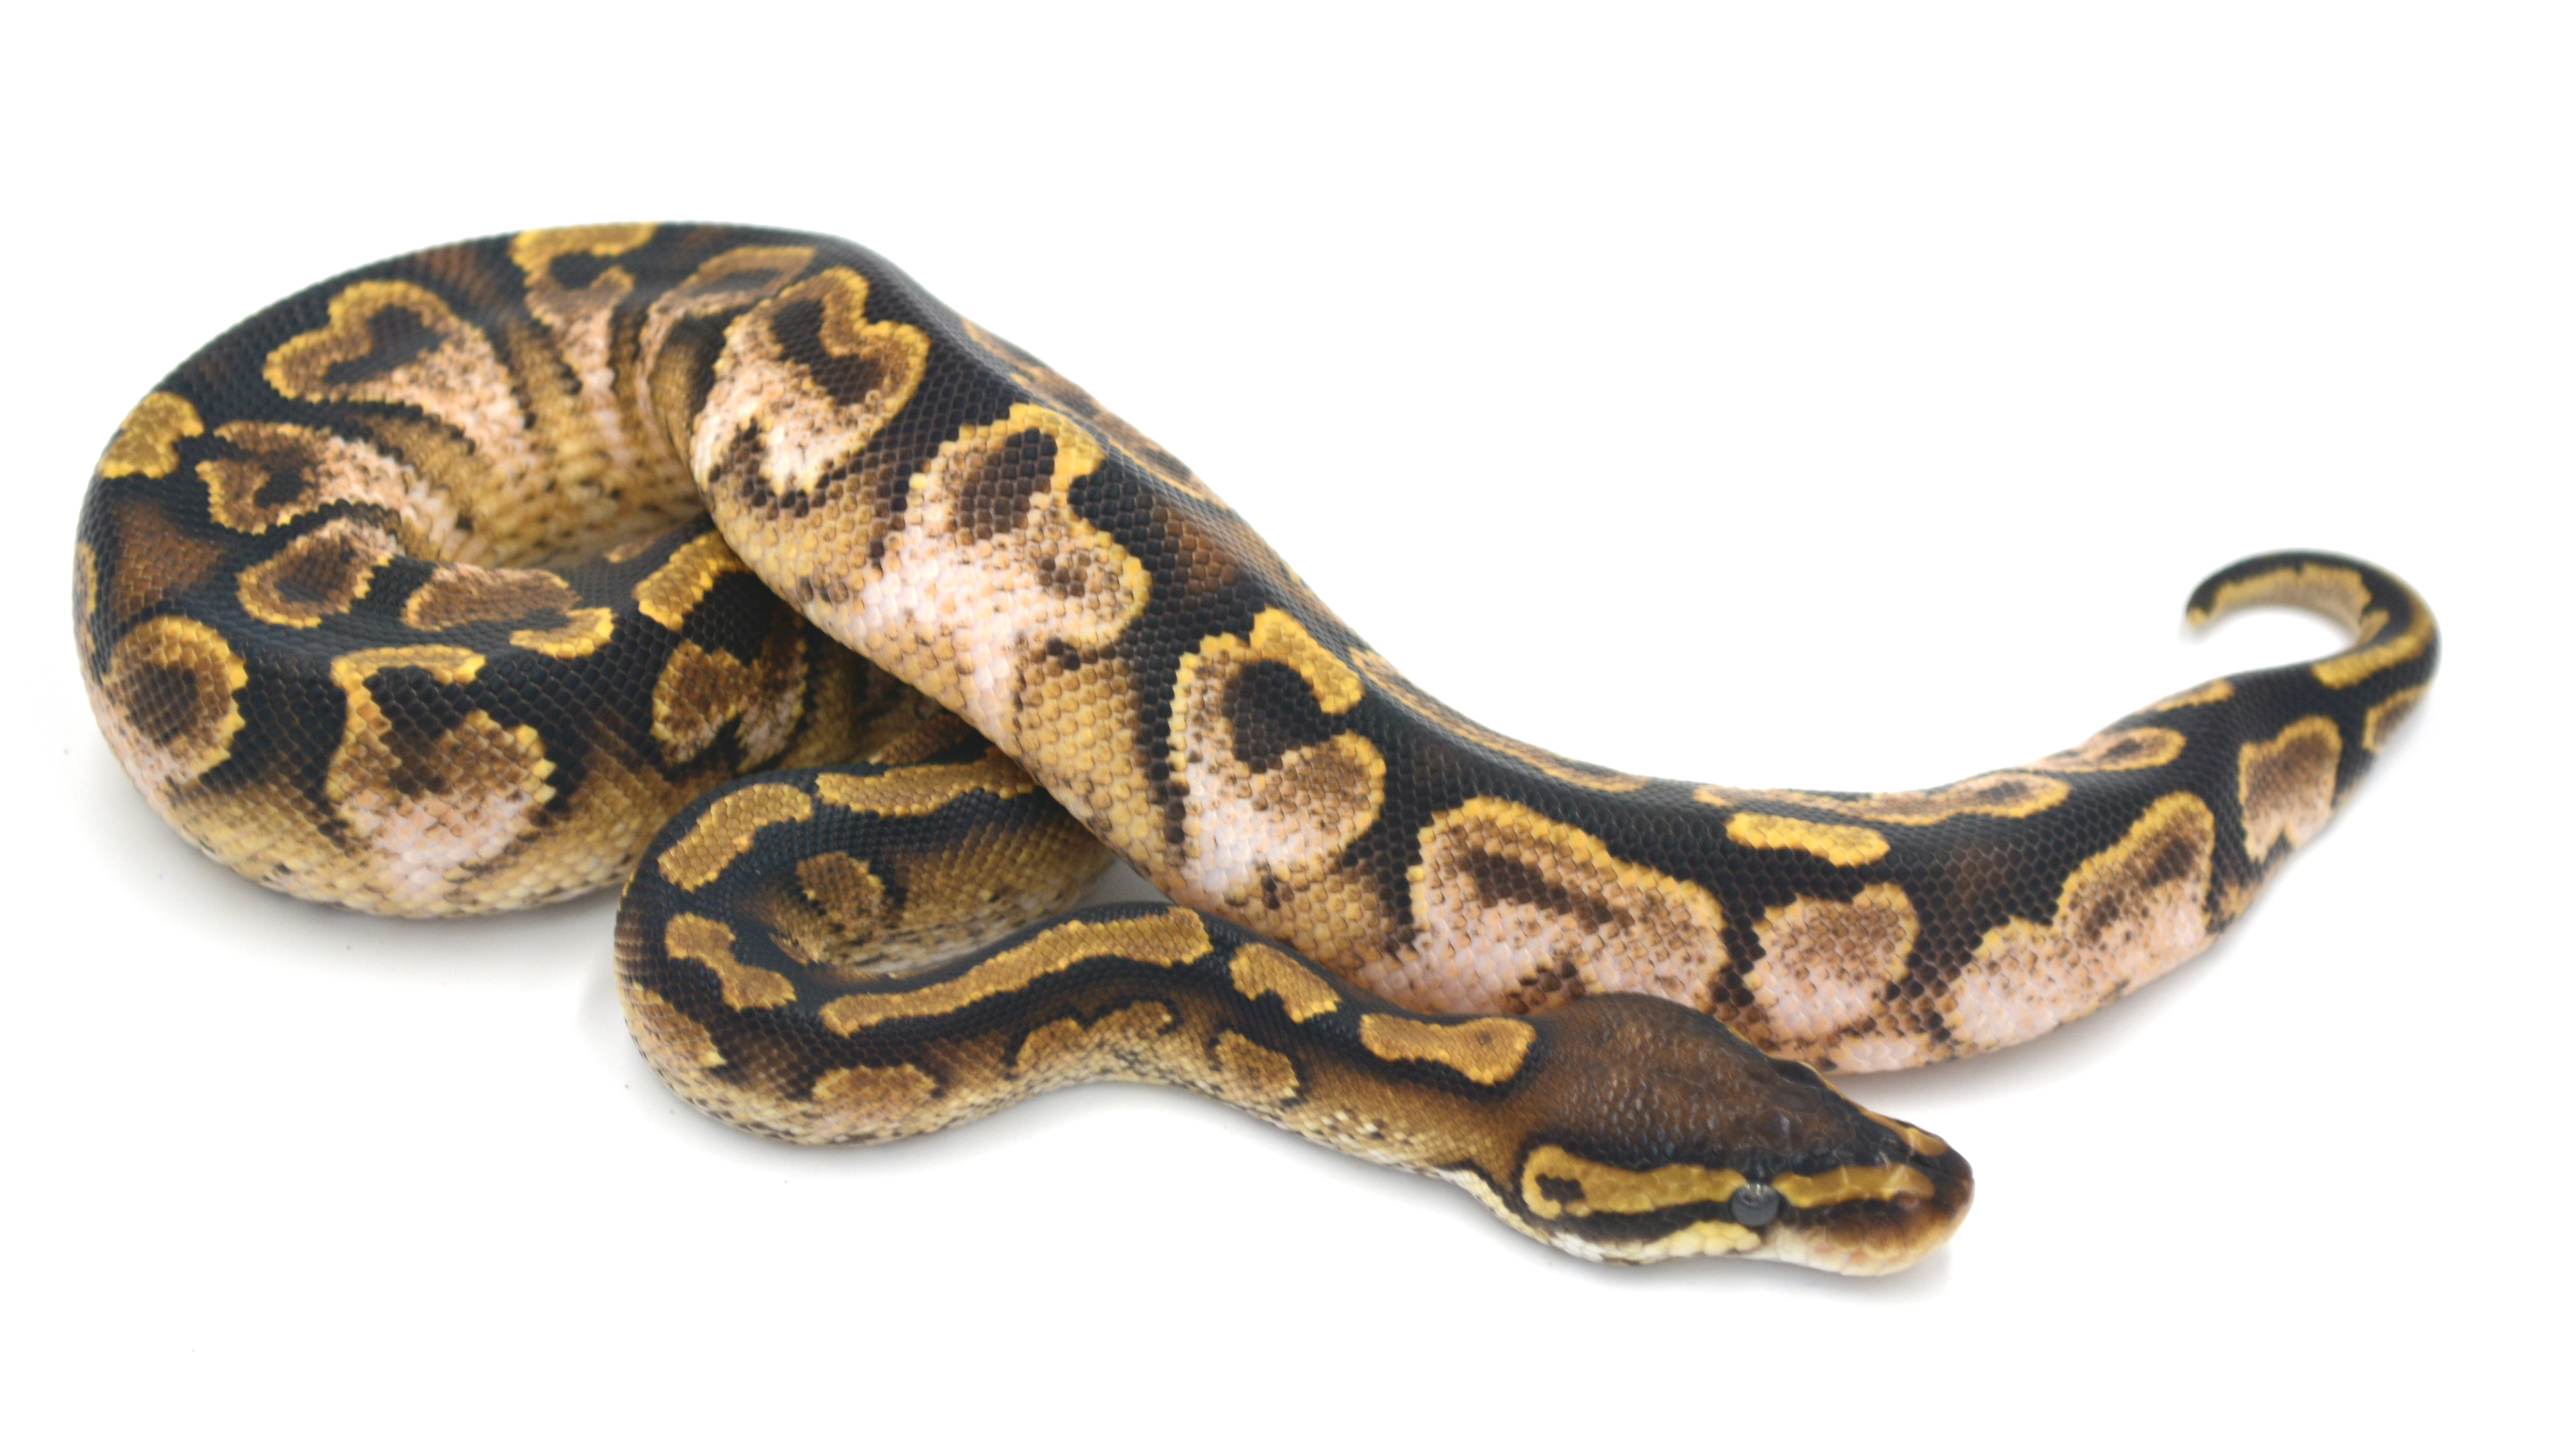 Calico Paint Ball Python by Wreck Room Snakes